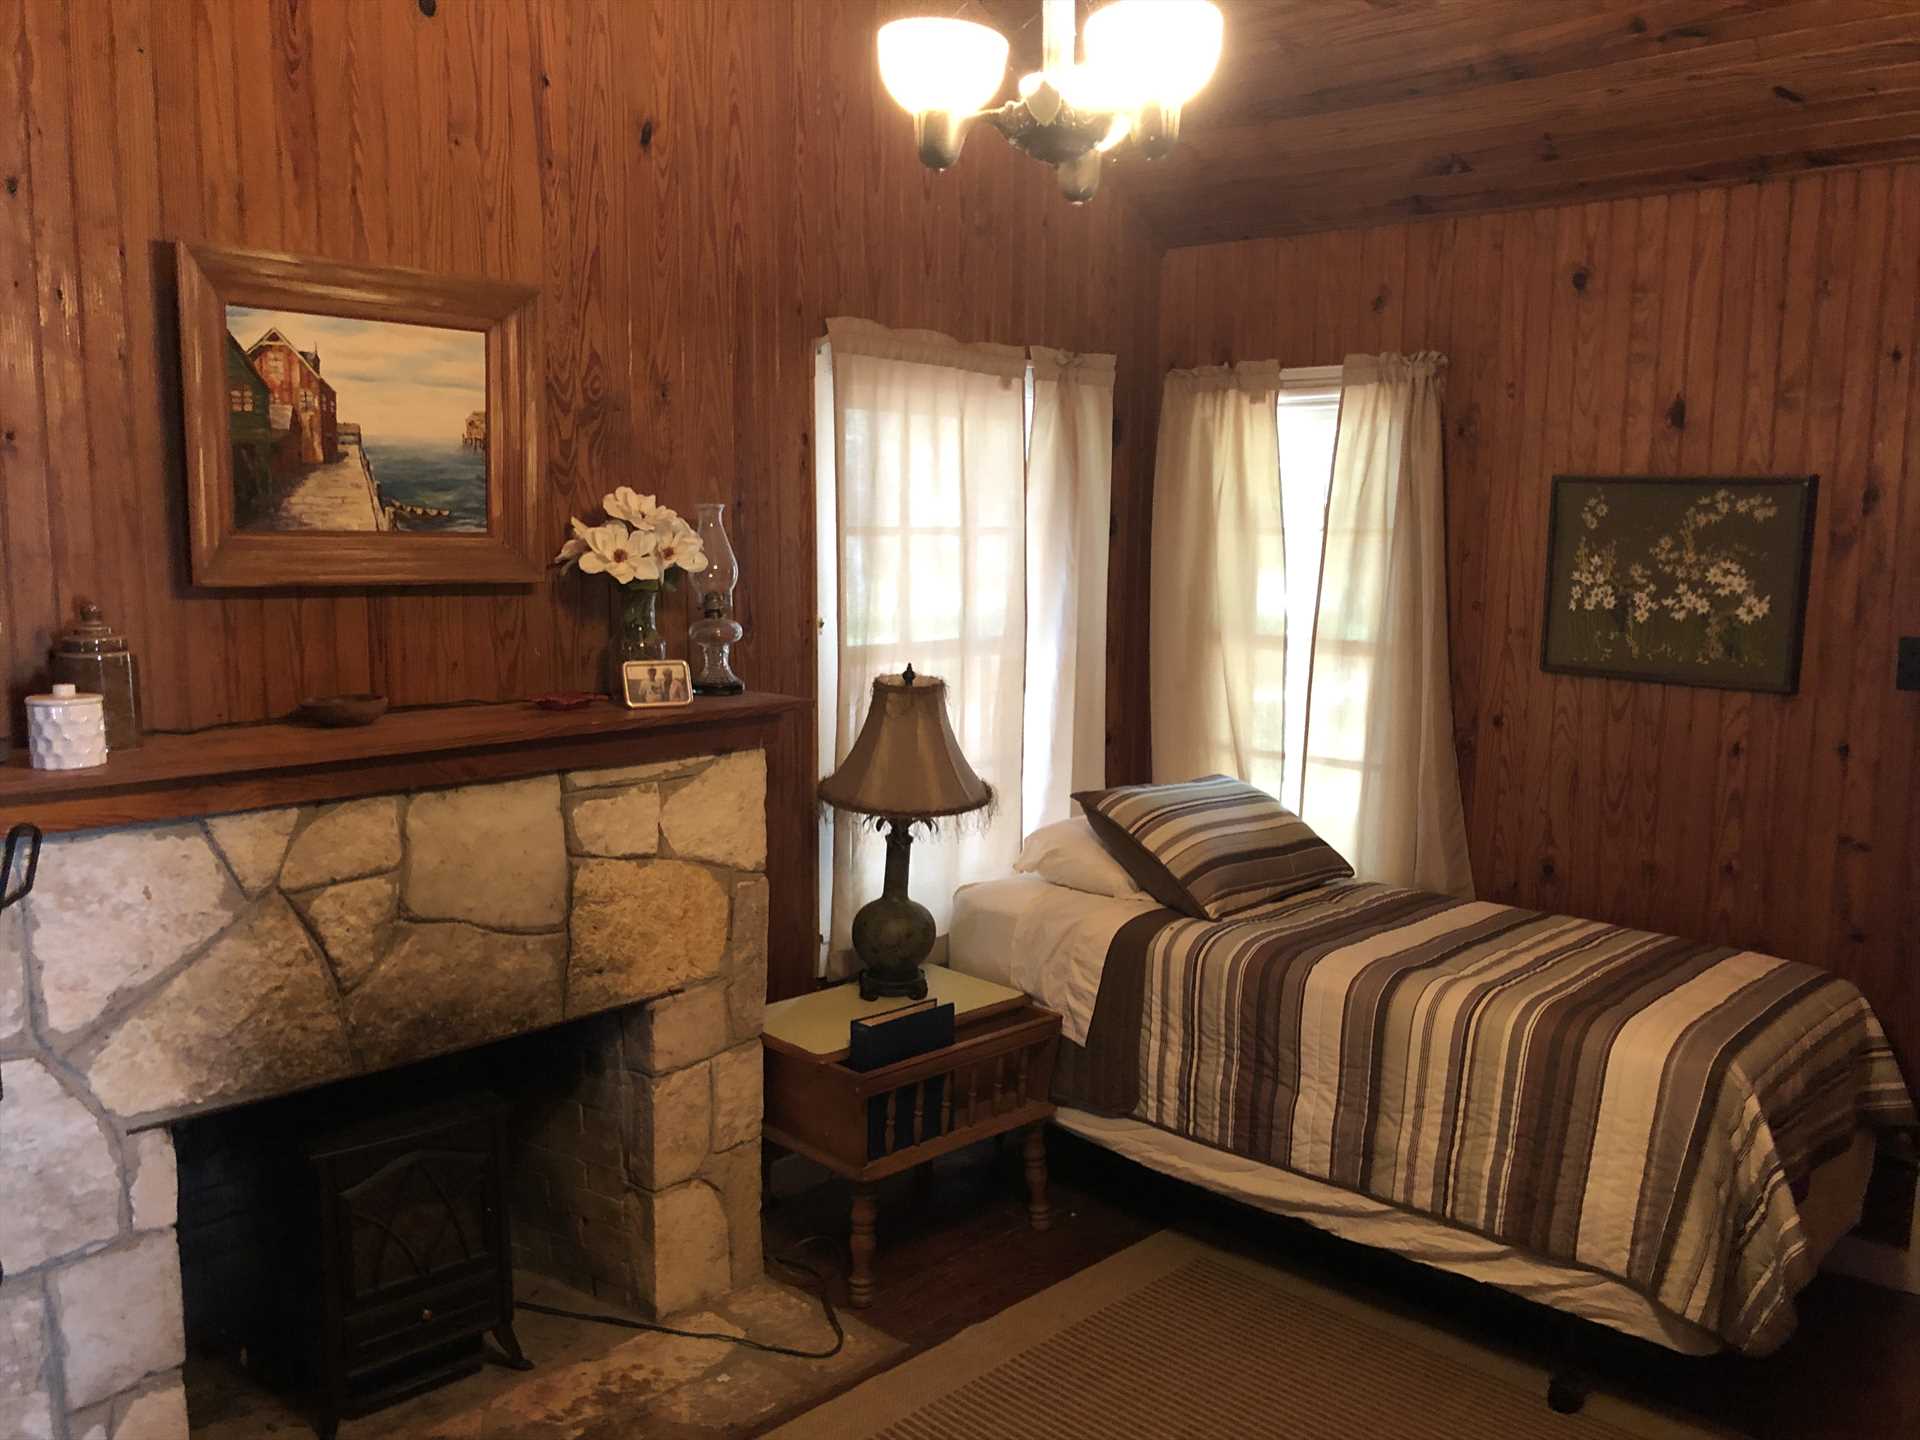                                                 The twin bed in the den is close to the electric fireplace-a great place to warm your toes on chilly nights!